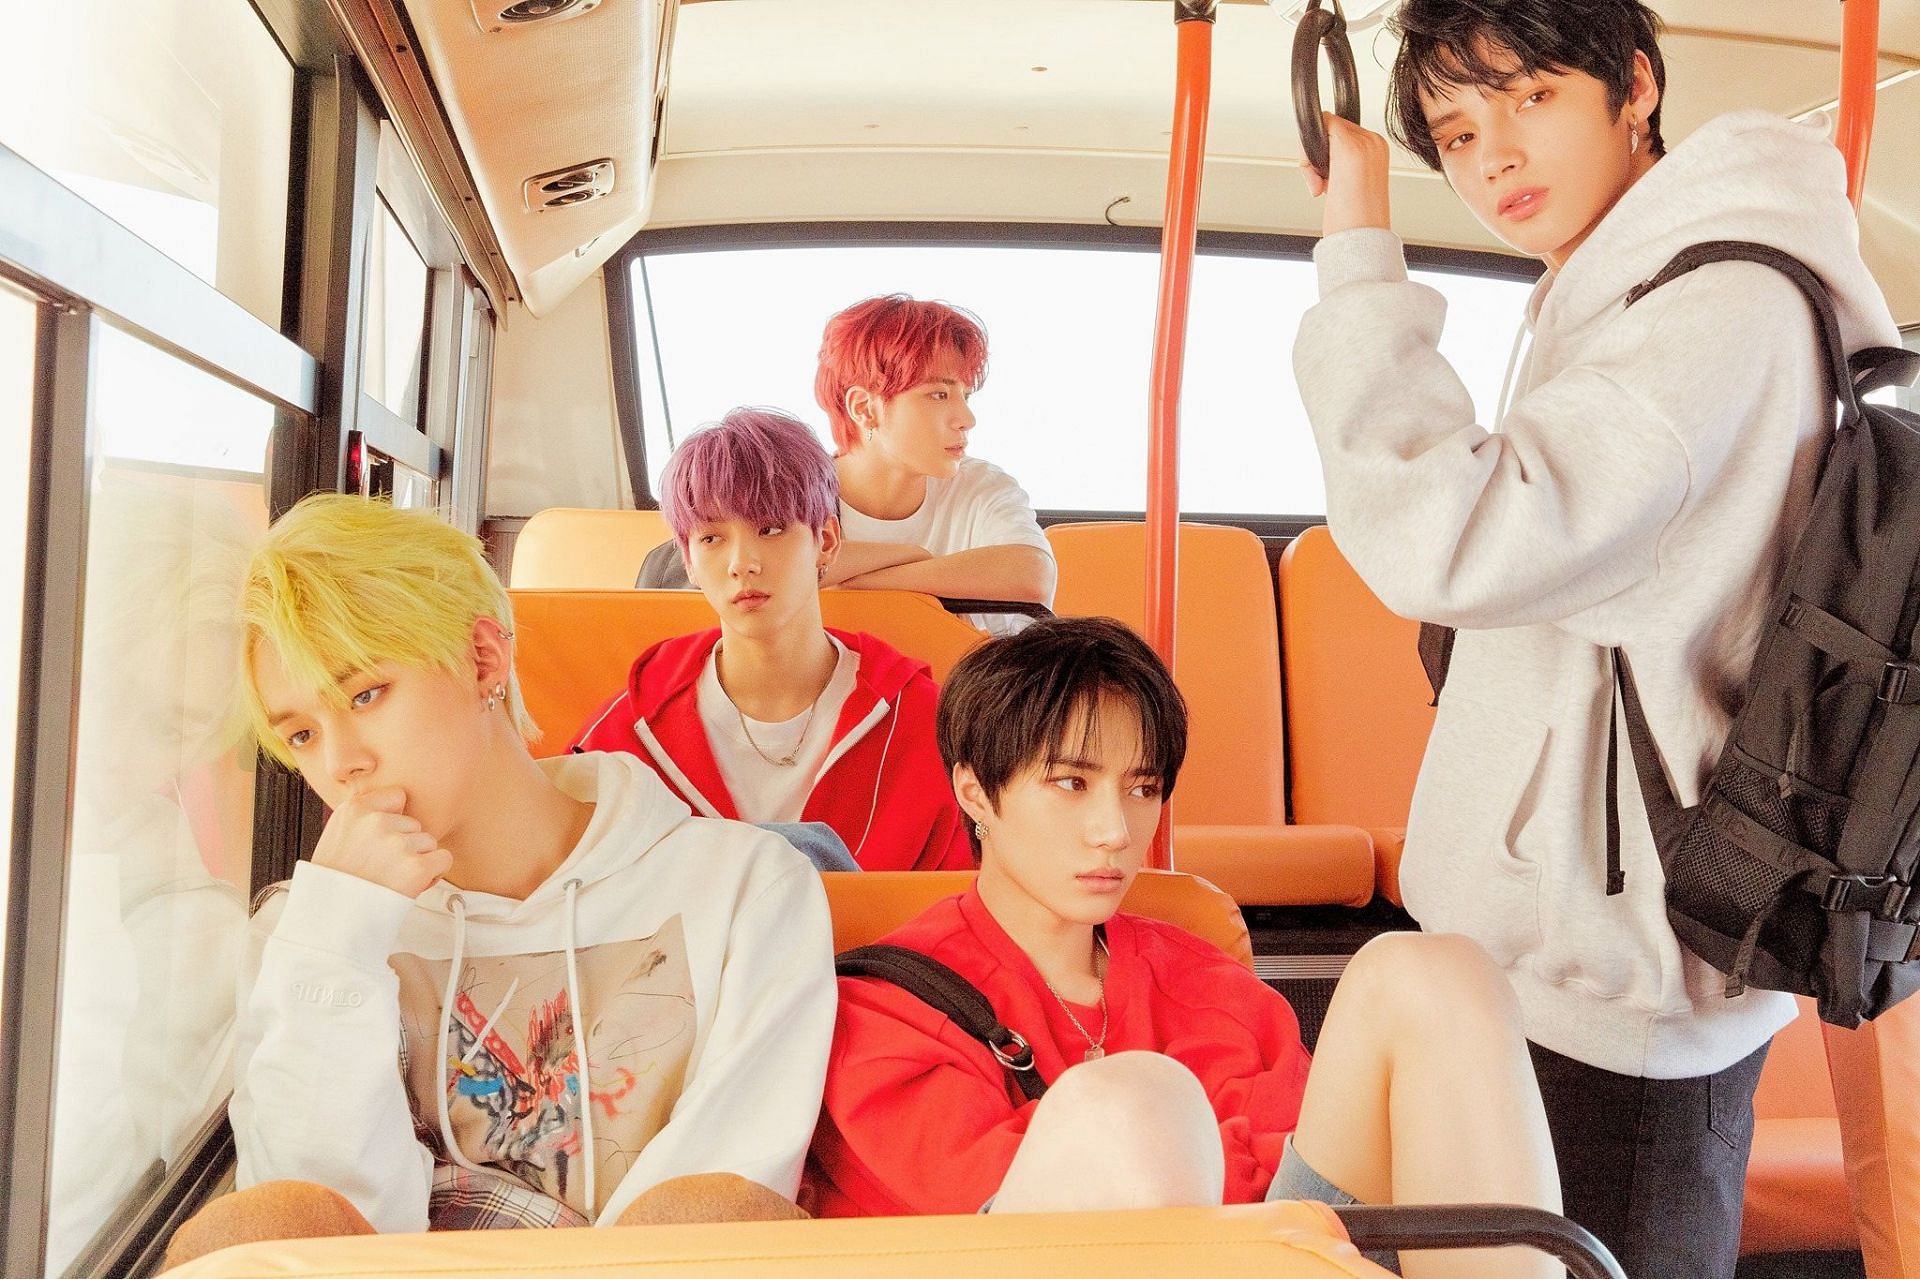 TXT songs reflect the troubles of the youth, including friendship, love, and adventure. (Image via BIGHIT MUSIC)